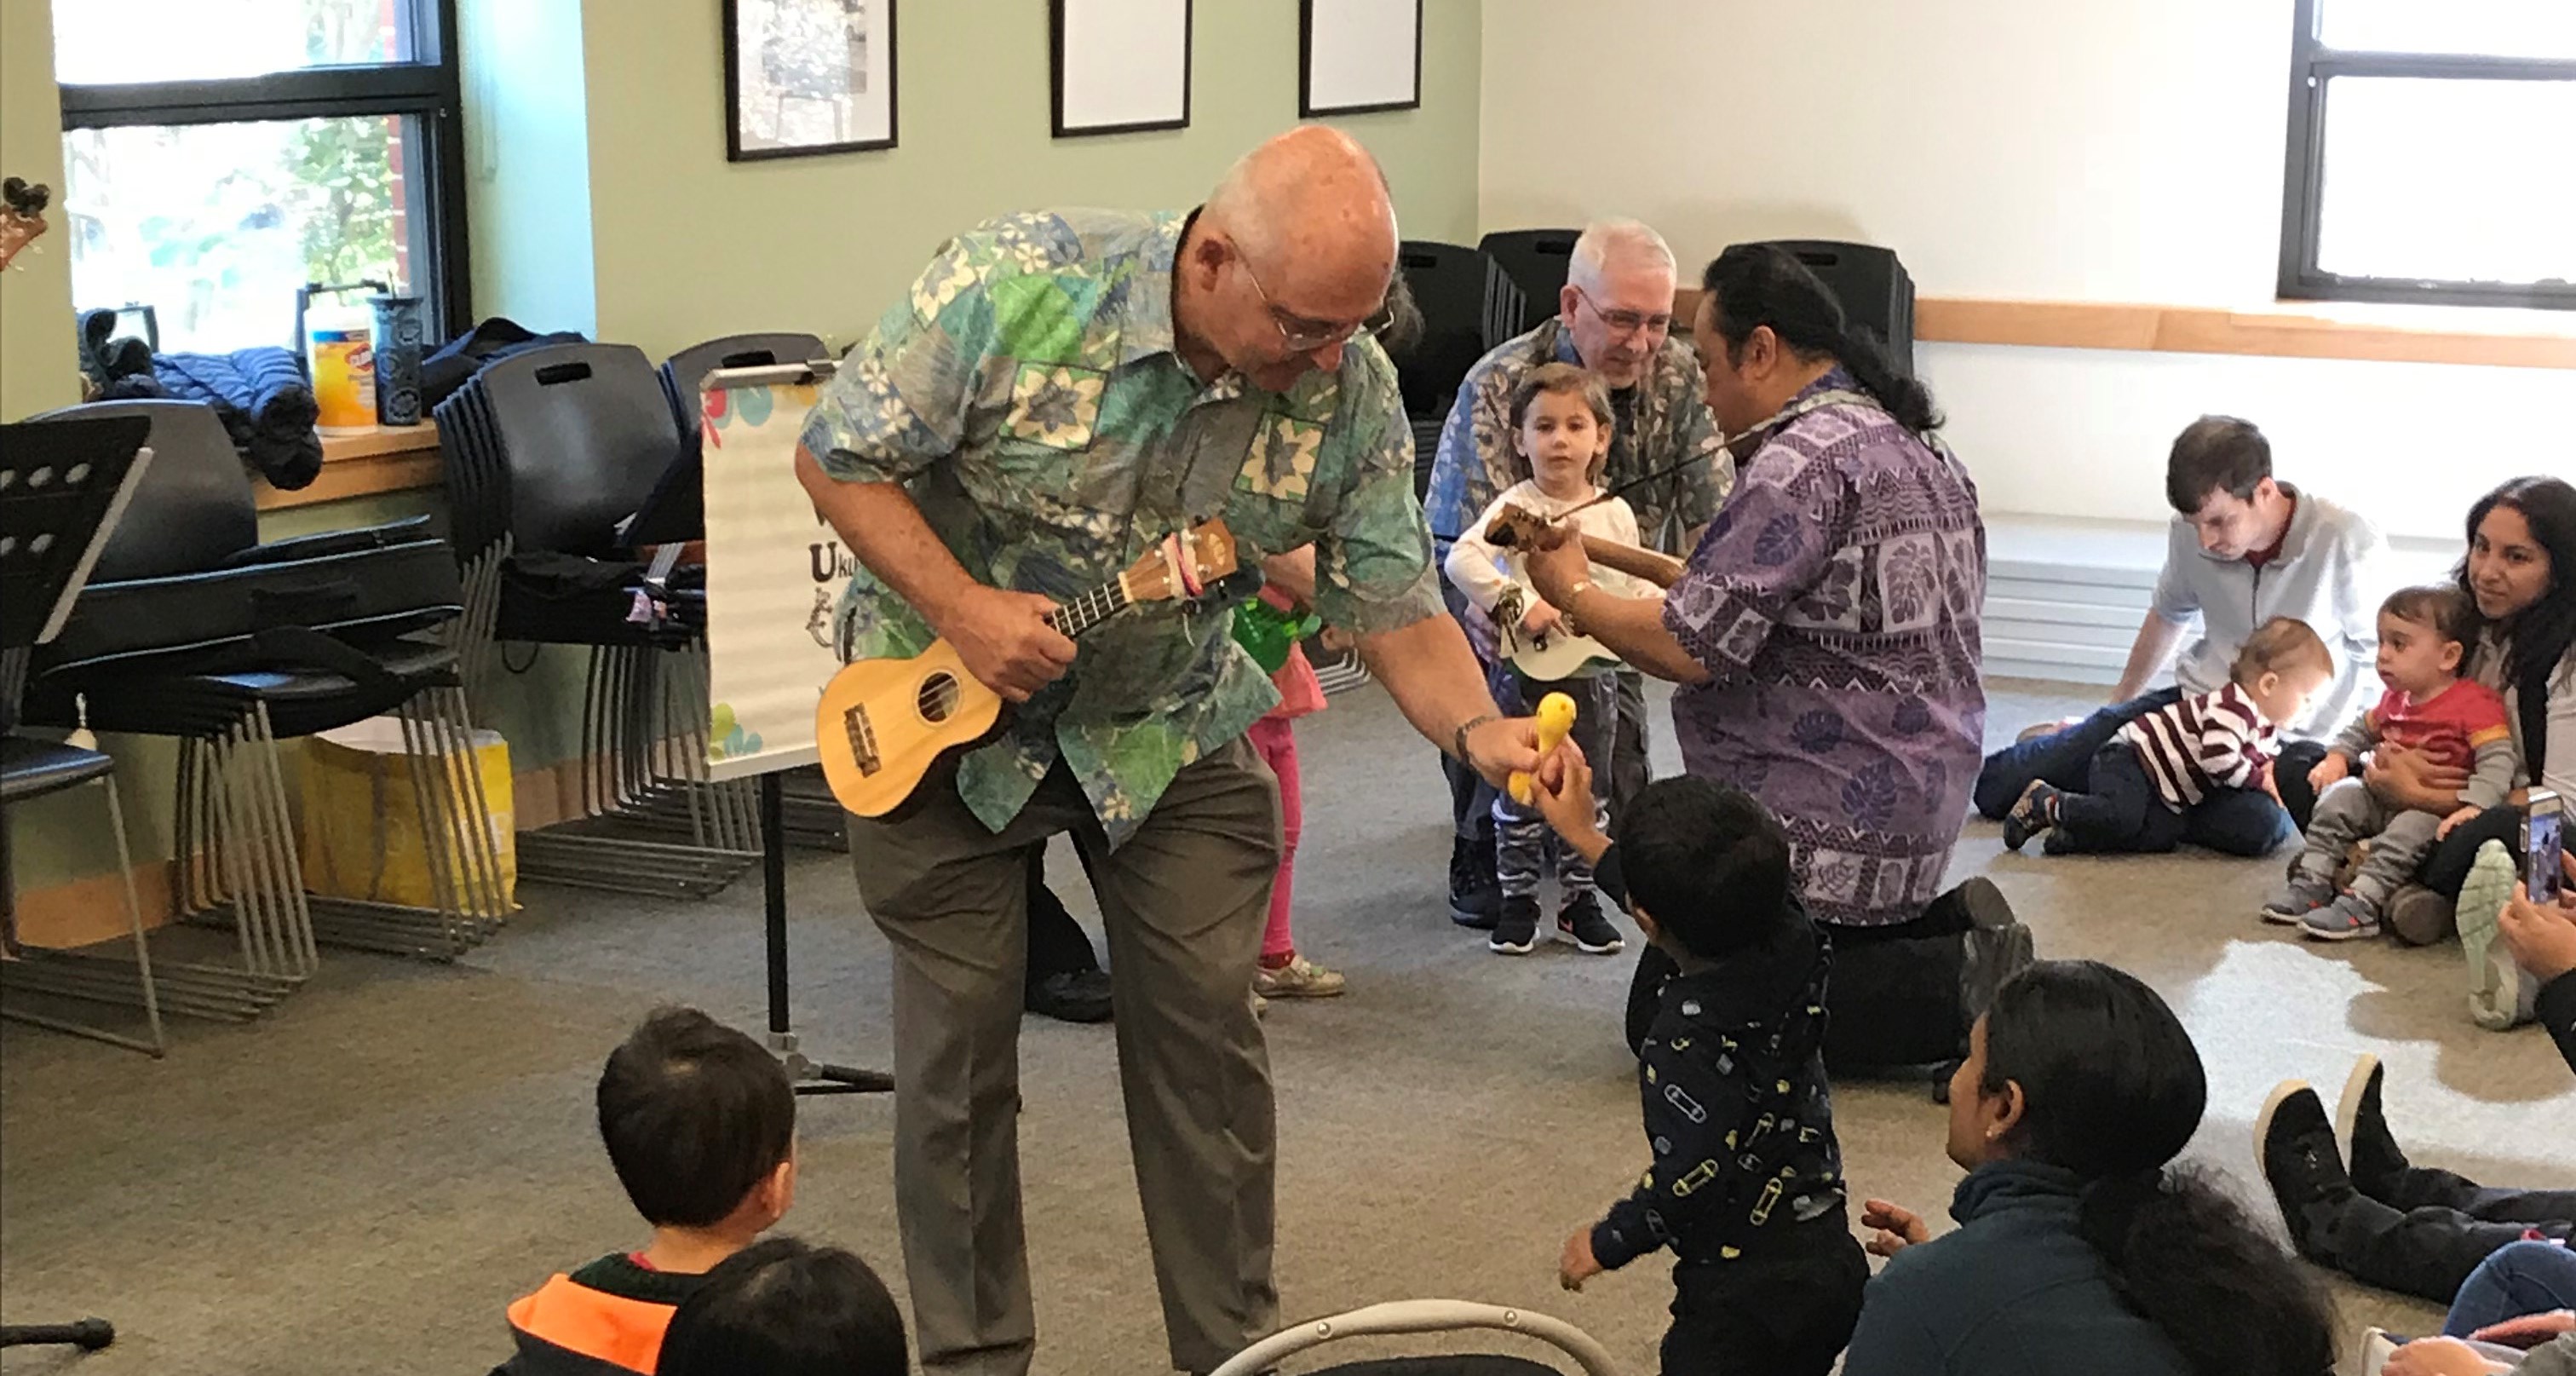 Burke Centre Library Children's Stories and Song (Oct 2019)